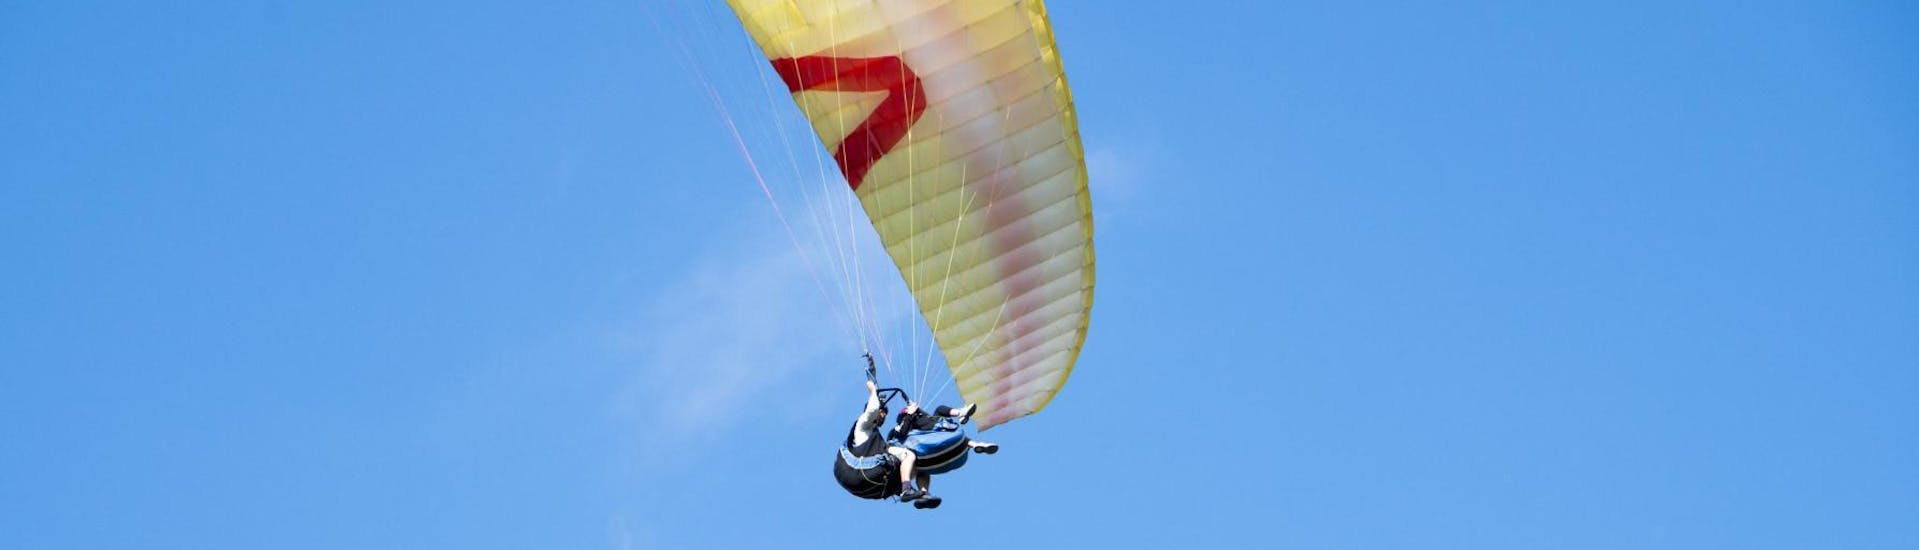 tandem-paragliding-from-ivanscica-moutain-sky-riders-paragliding-croatia-hero